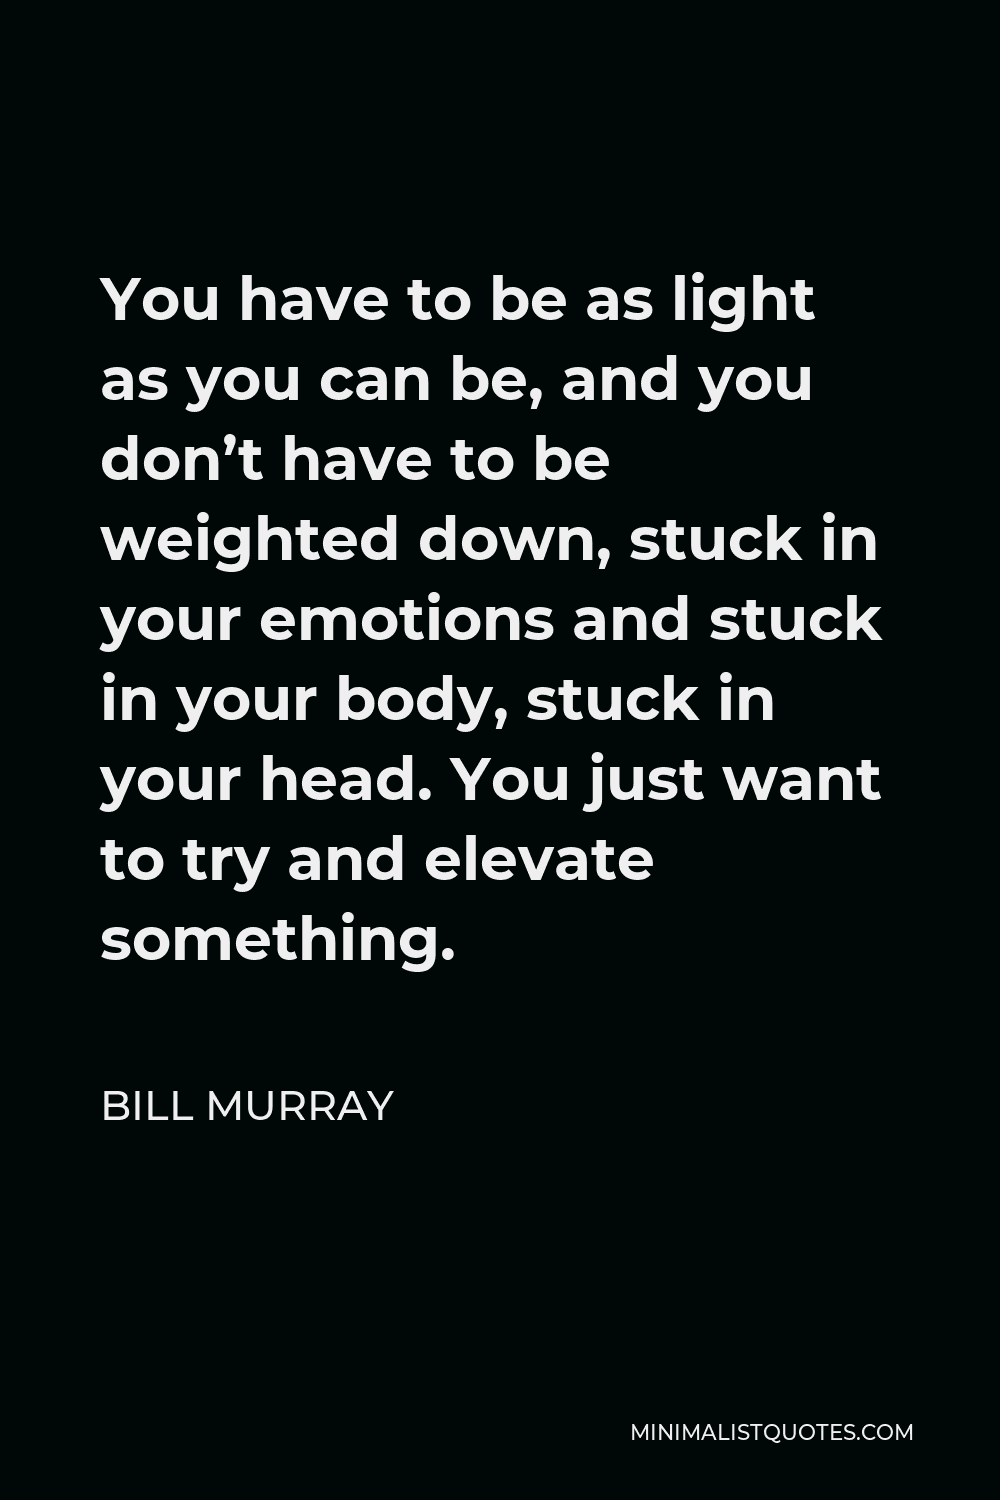 Bill Murray Quote - You have to be as light as you can be, and you don’t have to be weighted down, stuck in your emotions and stuck in your body, stuck in your head. You just want to try and elevate something.